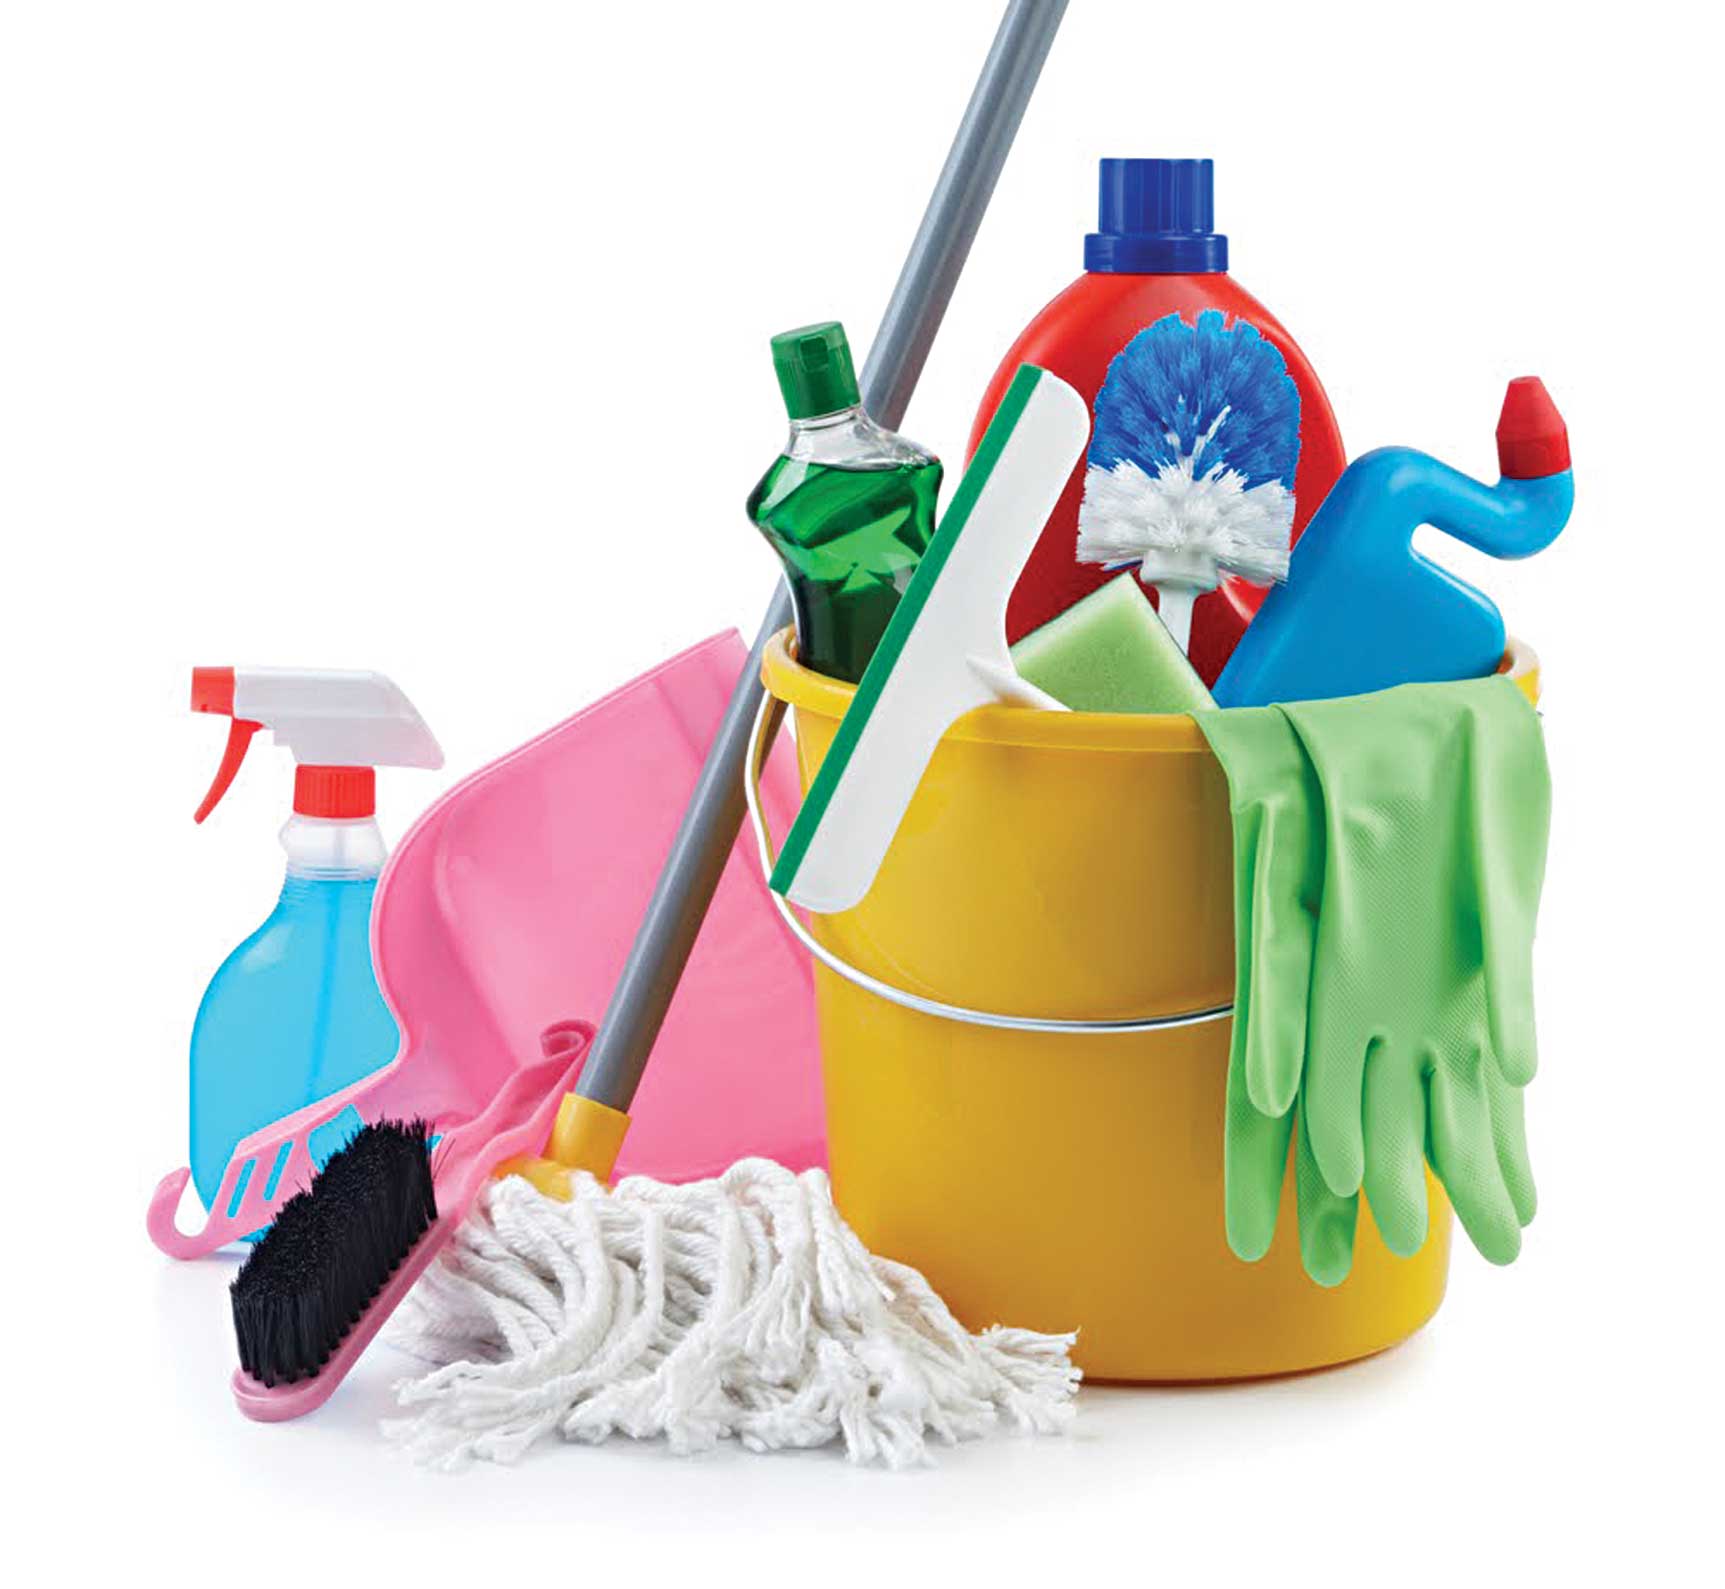 Superb Cleaners Purley Surrey